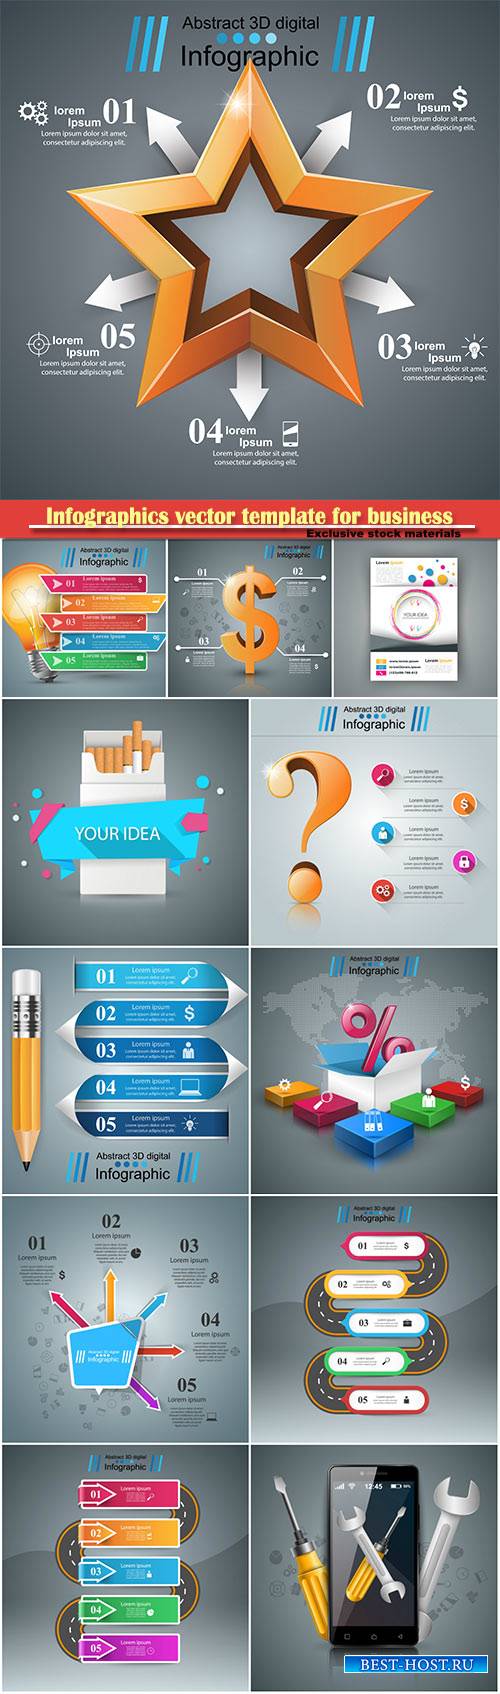 Infographics vector template for business presentations or information banner # 65